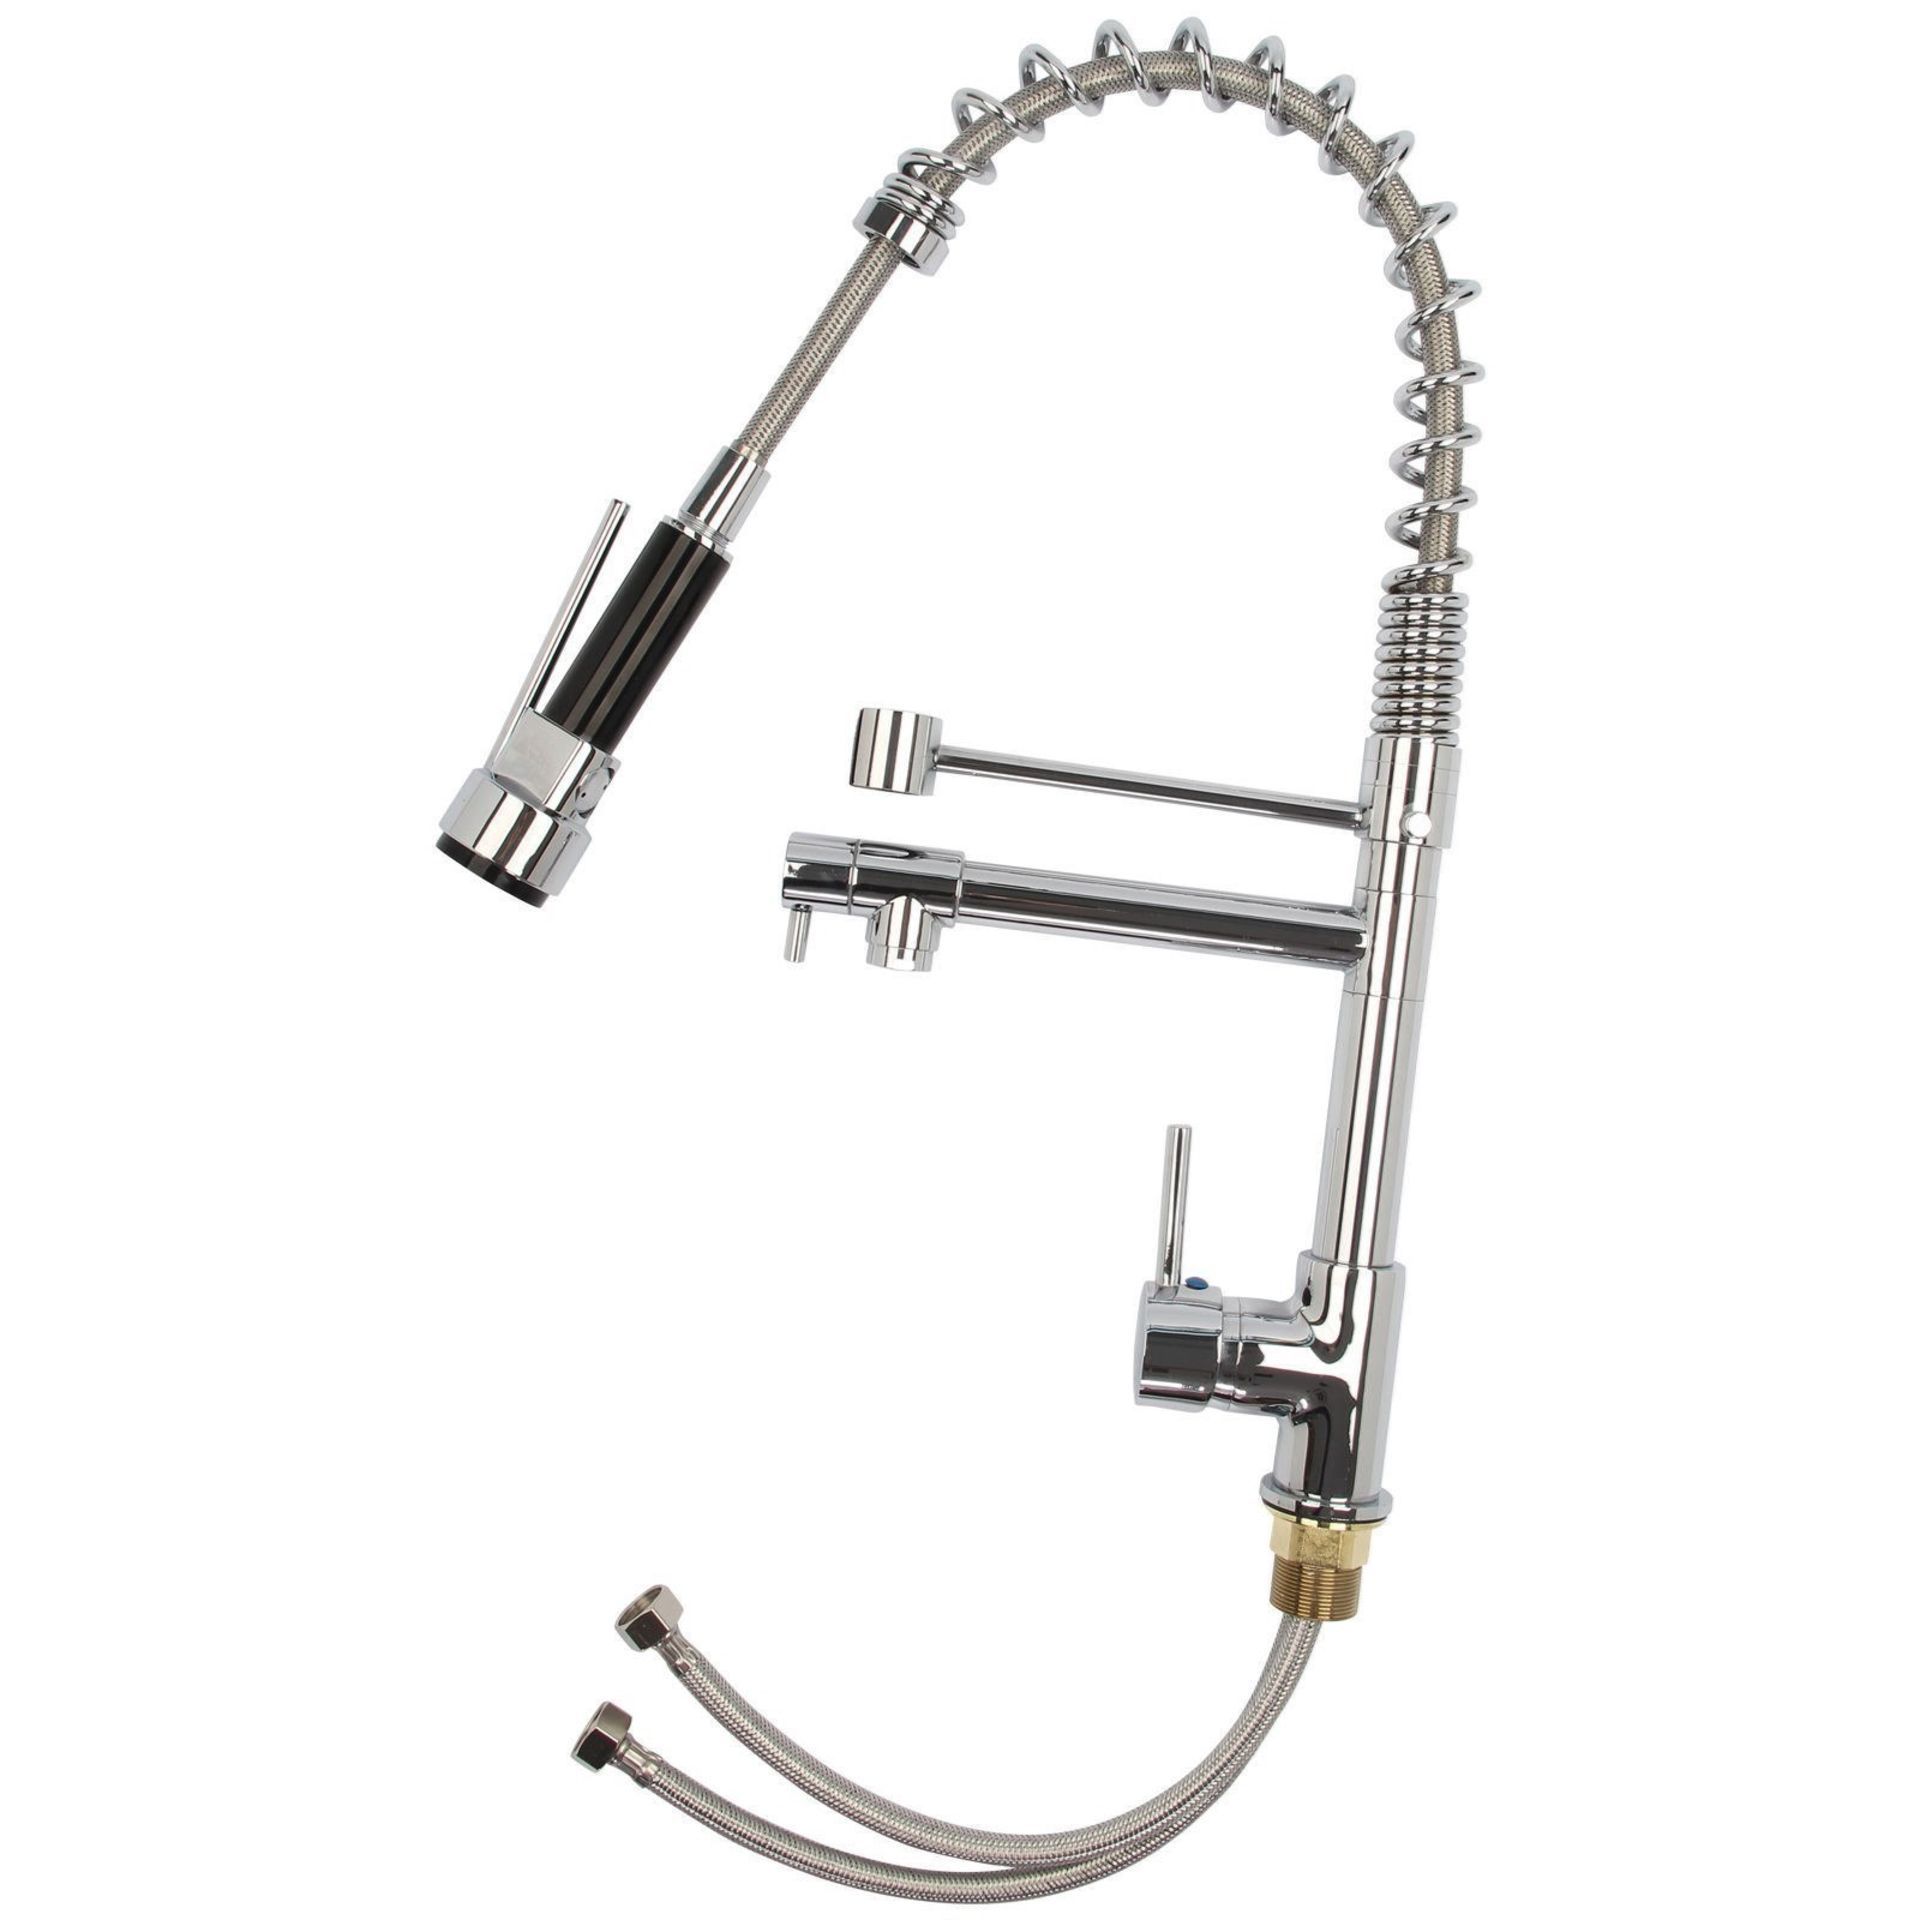 Brand New Bentley Modern Monobloc Chrome Brass Pull Out Spray Mixer Tap.RRP £349.99.This tap is from - Image 2 of 2